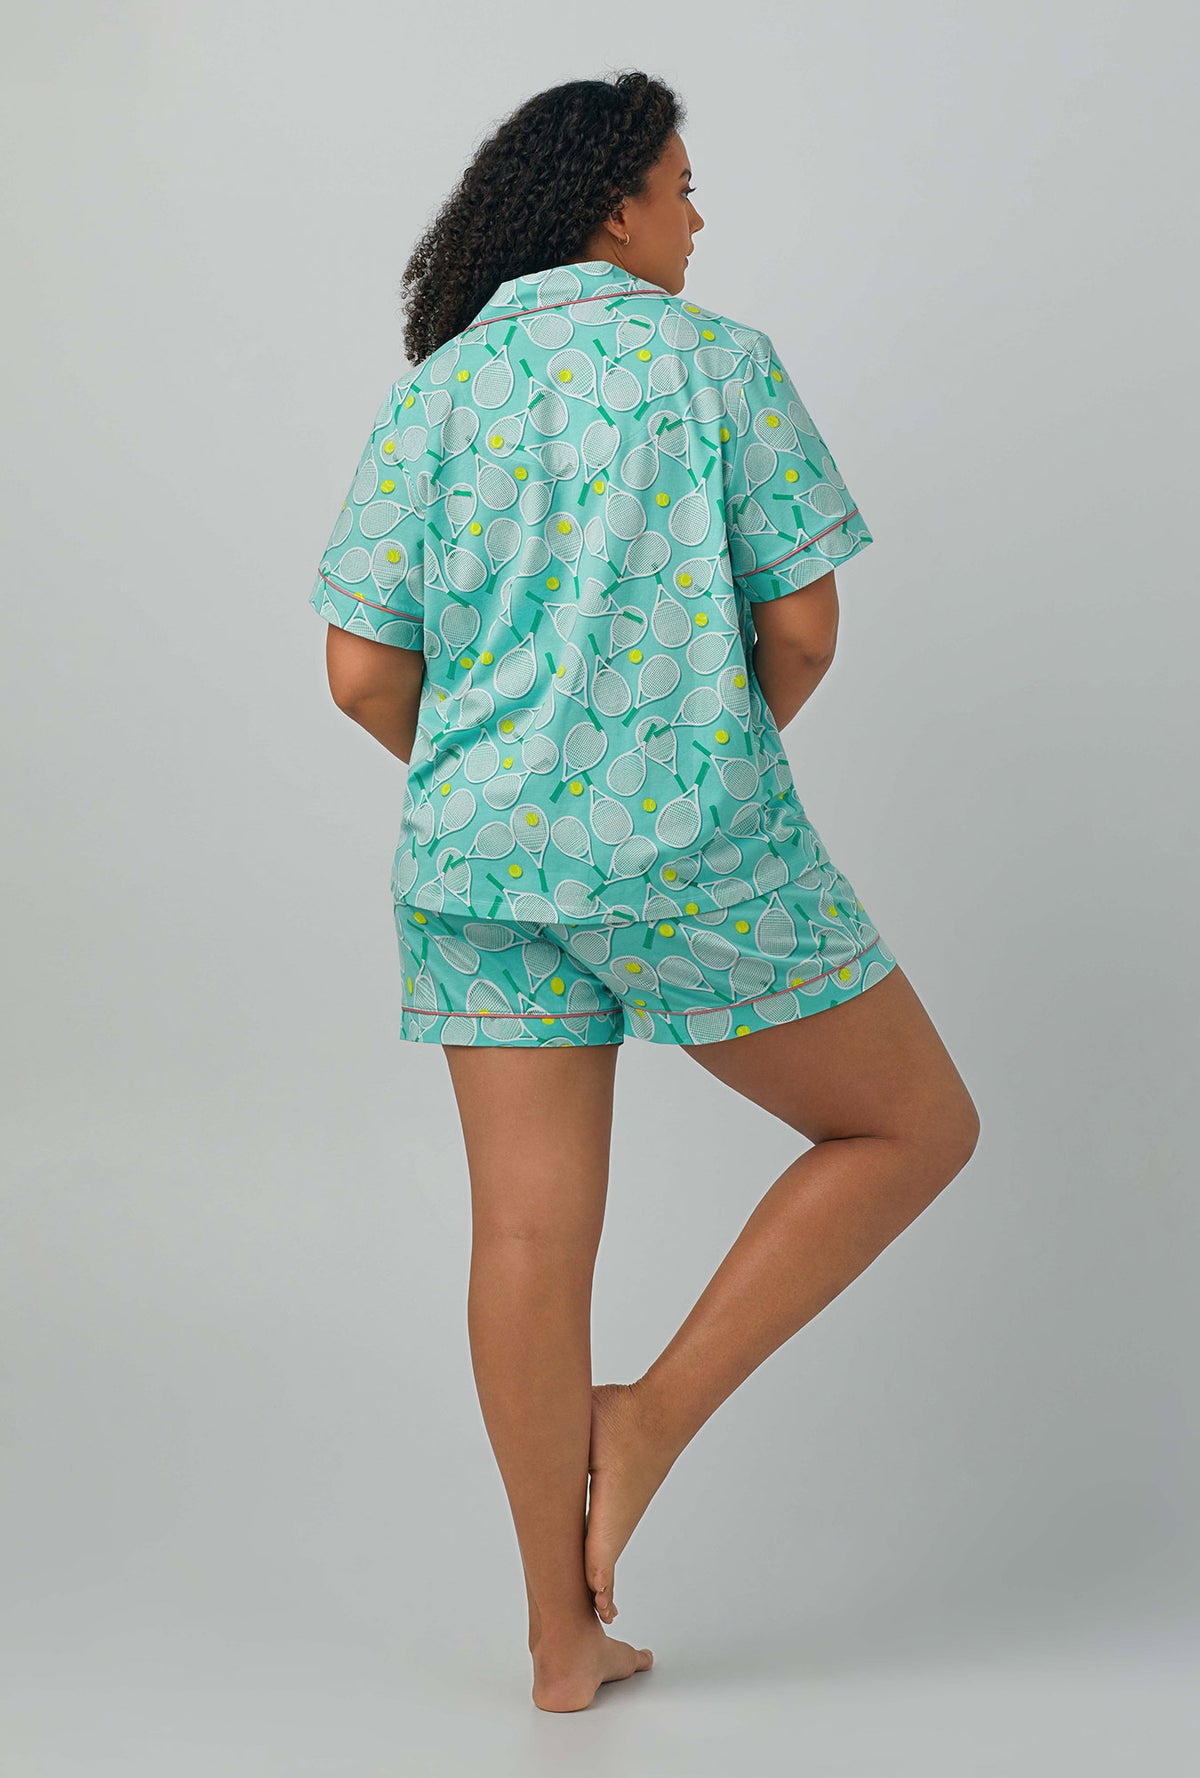 A lady wearing plus size green Short Sleeve Classic Shorty Stretch Jersey PJ Set with Tennis Club print